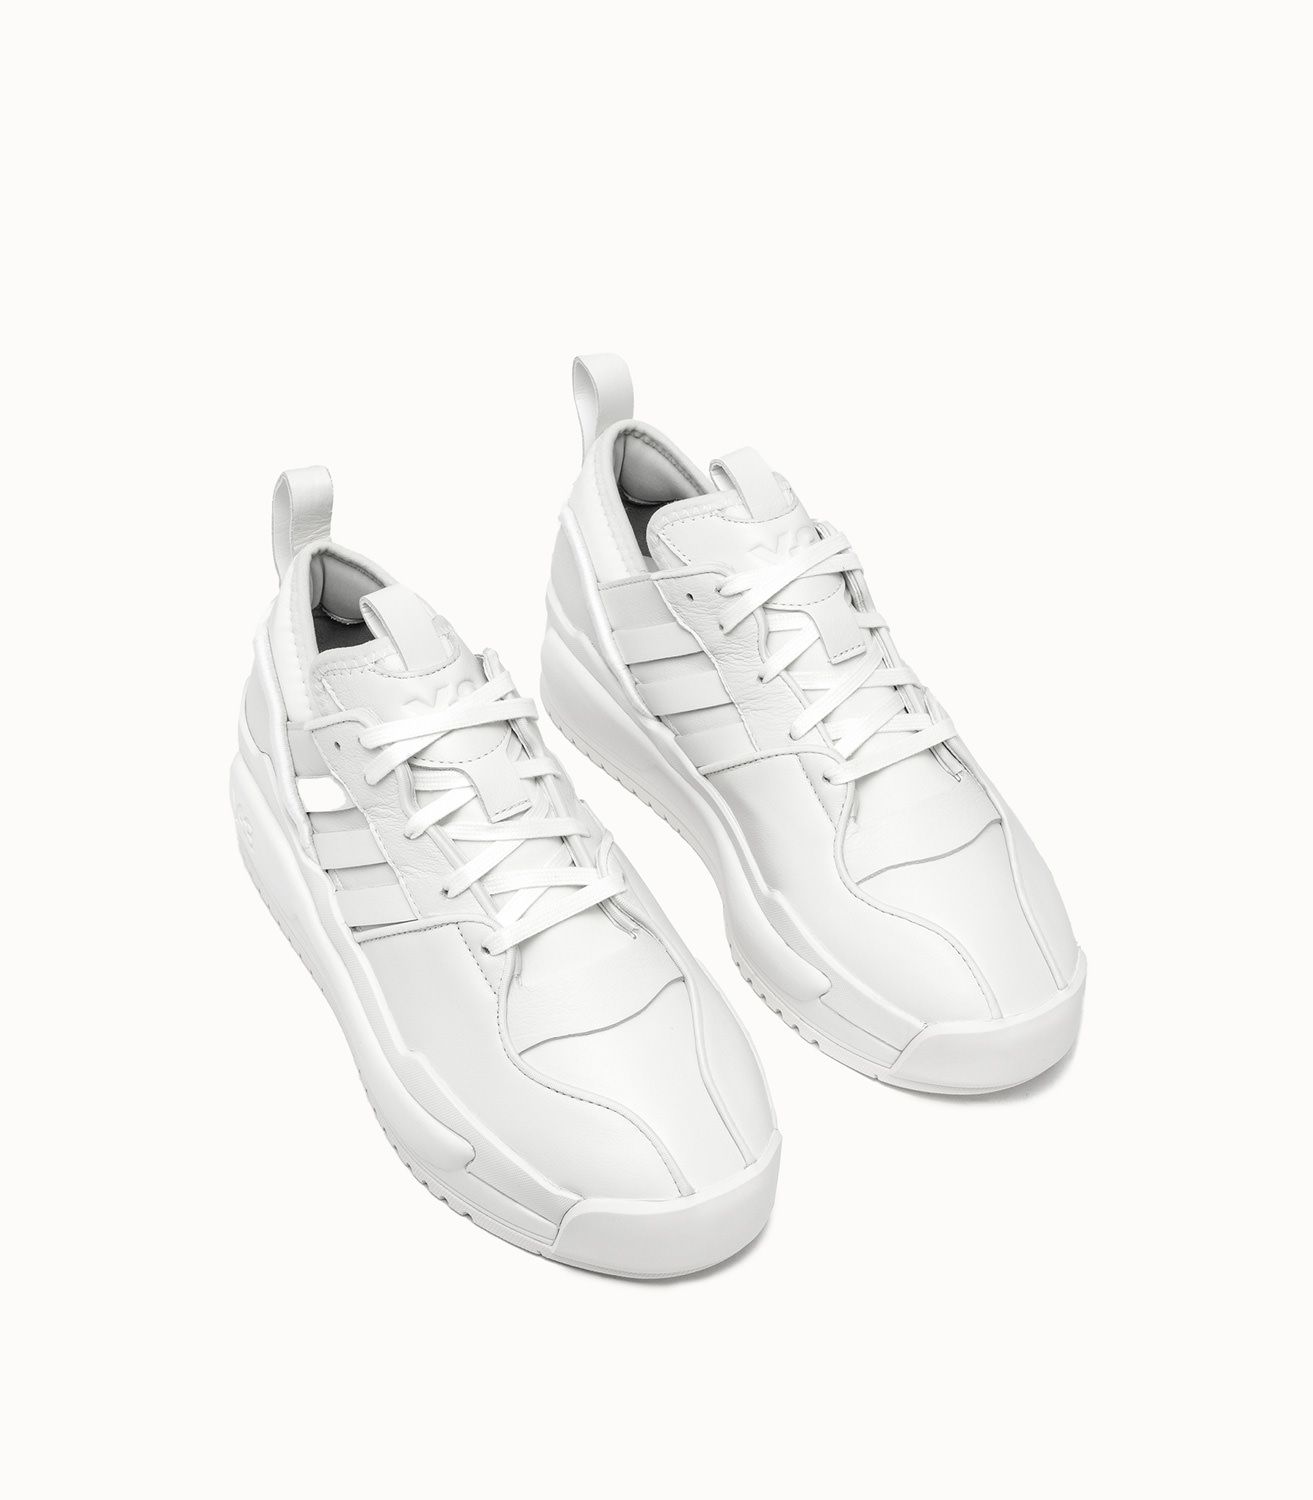 kultur biologi Stat ADIDAS Y-3 RIVALRY SNEAKERS COLOR WHITE | Playground